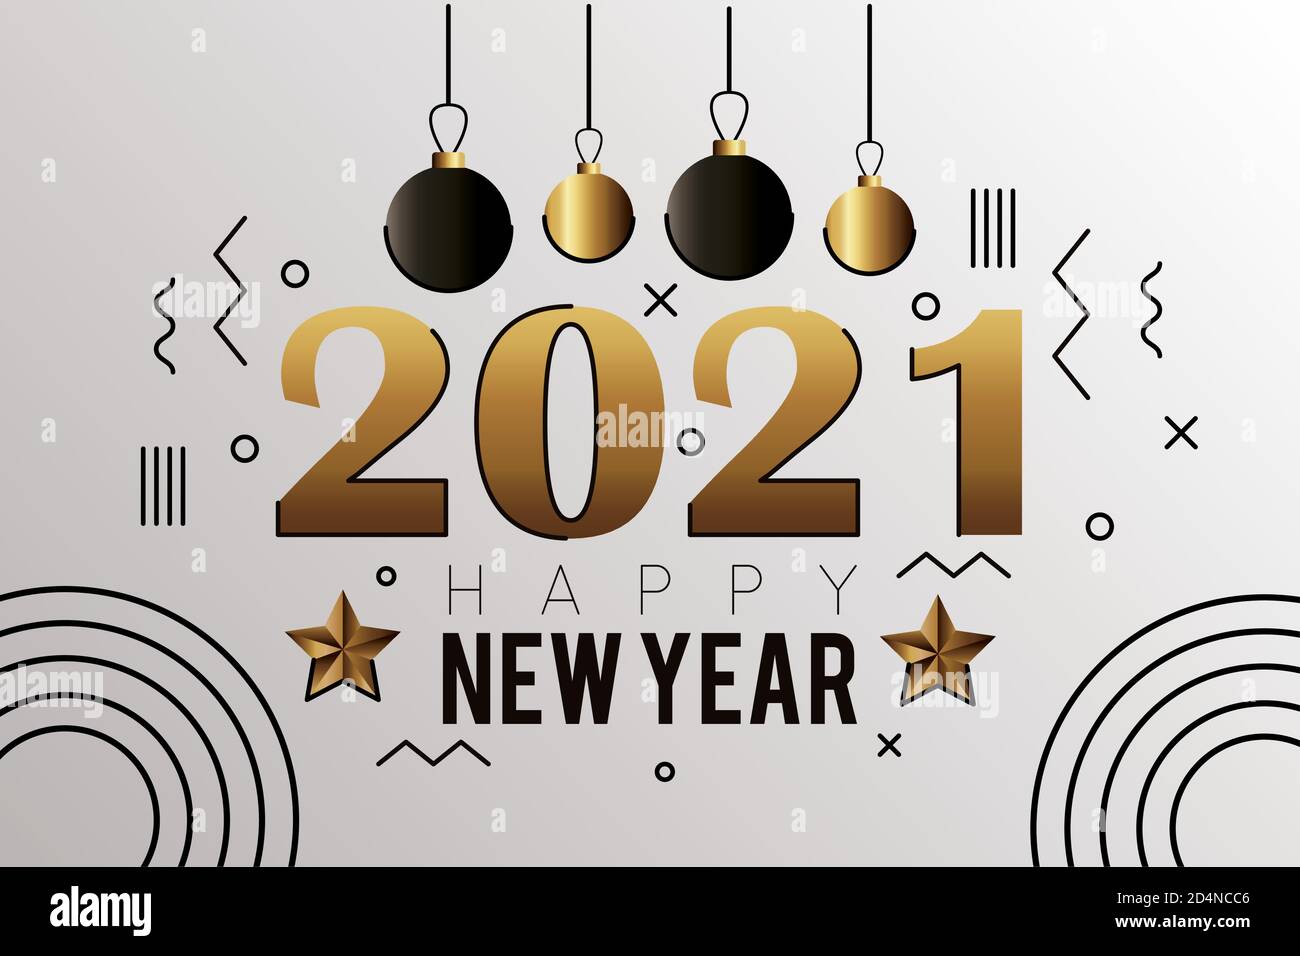 happy new year 2021 golden lettering with balls hanging card vector illustration design Stock Vector